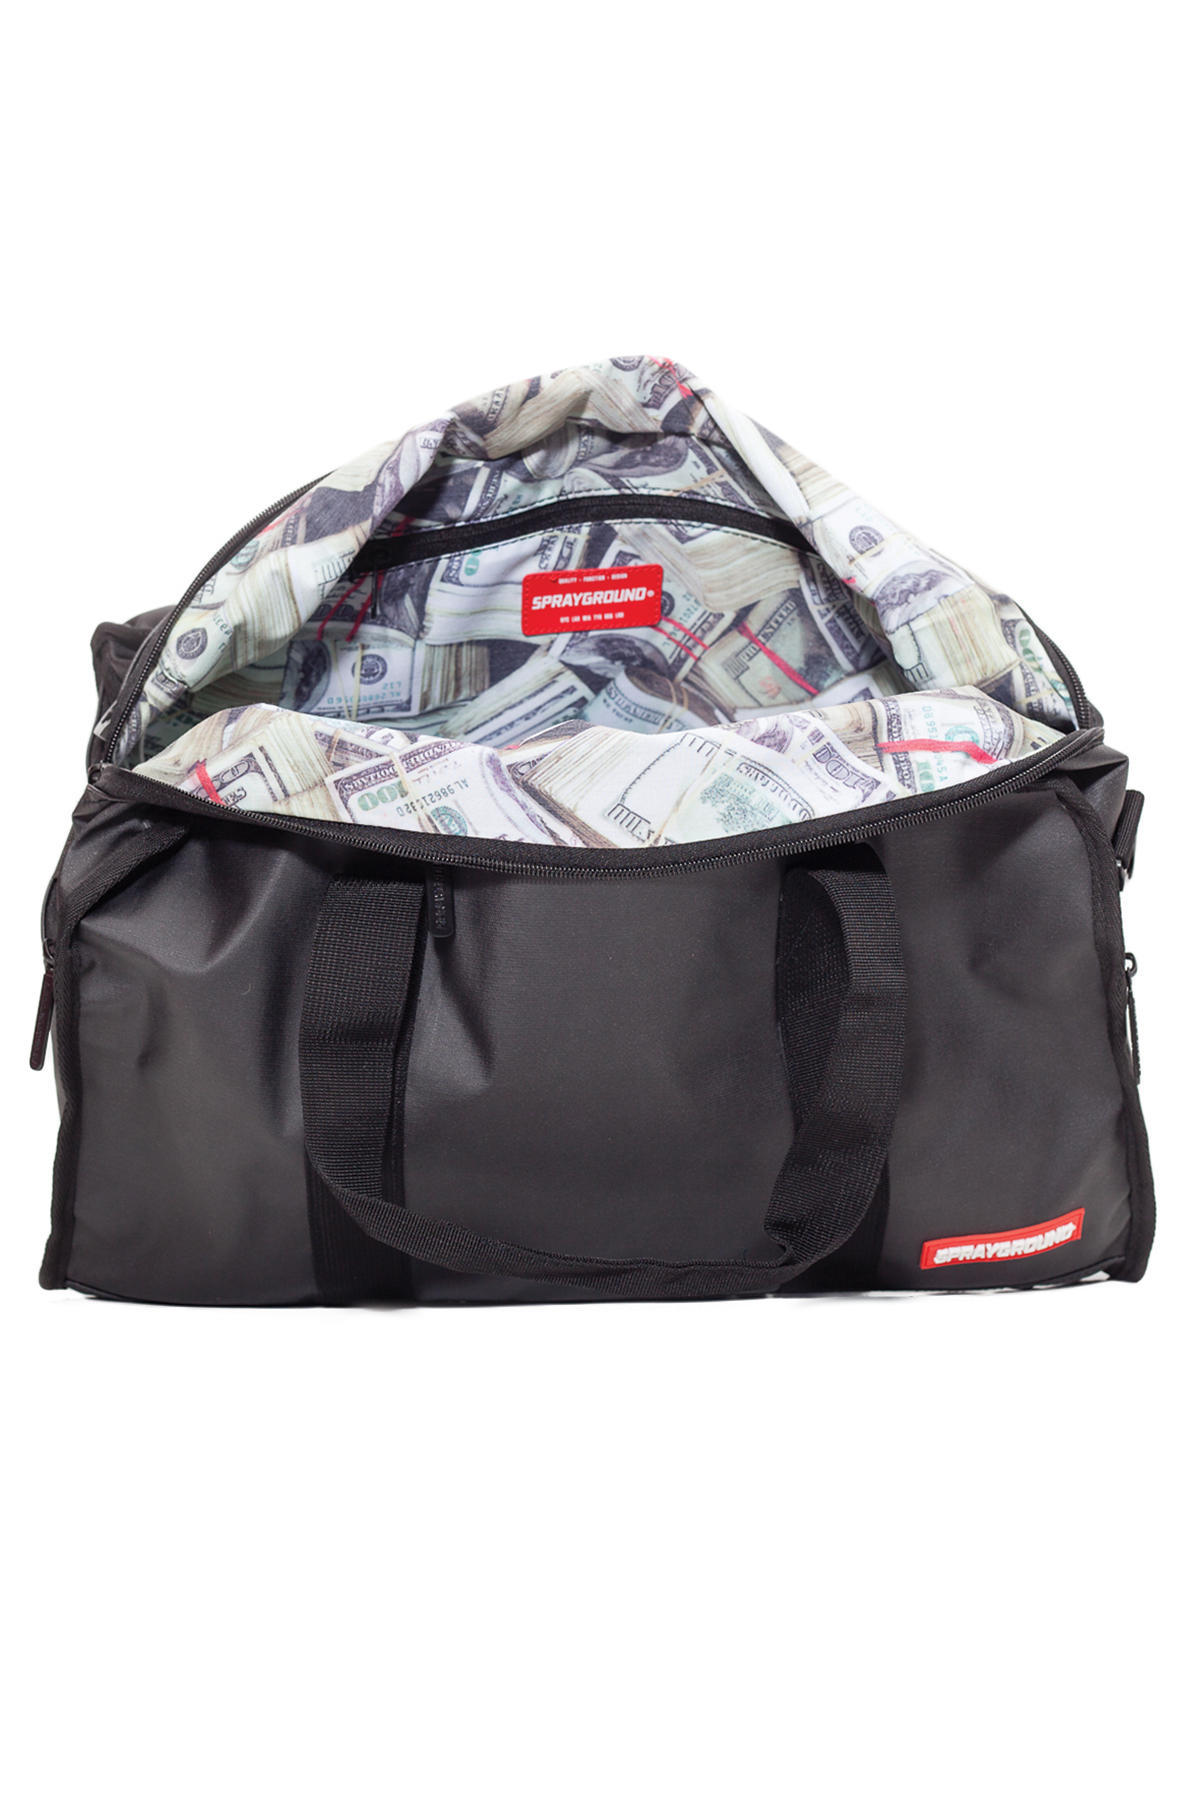 Lyst - Sprayground The Money Stashed Duffle Bag in Black for Men